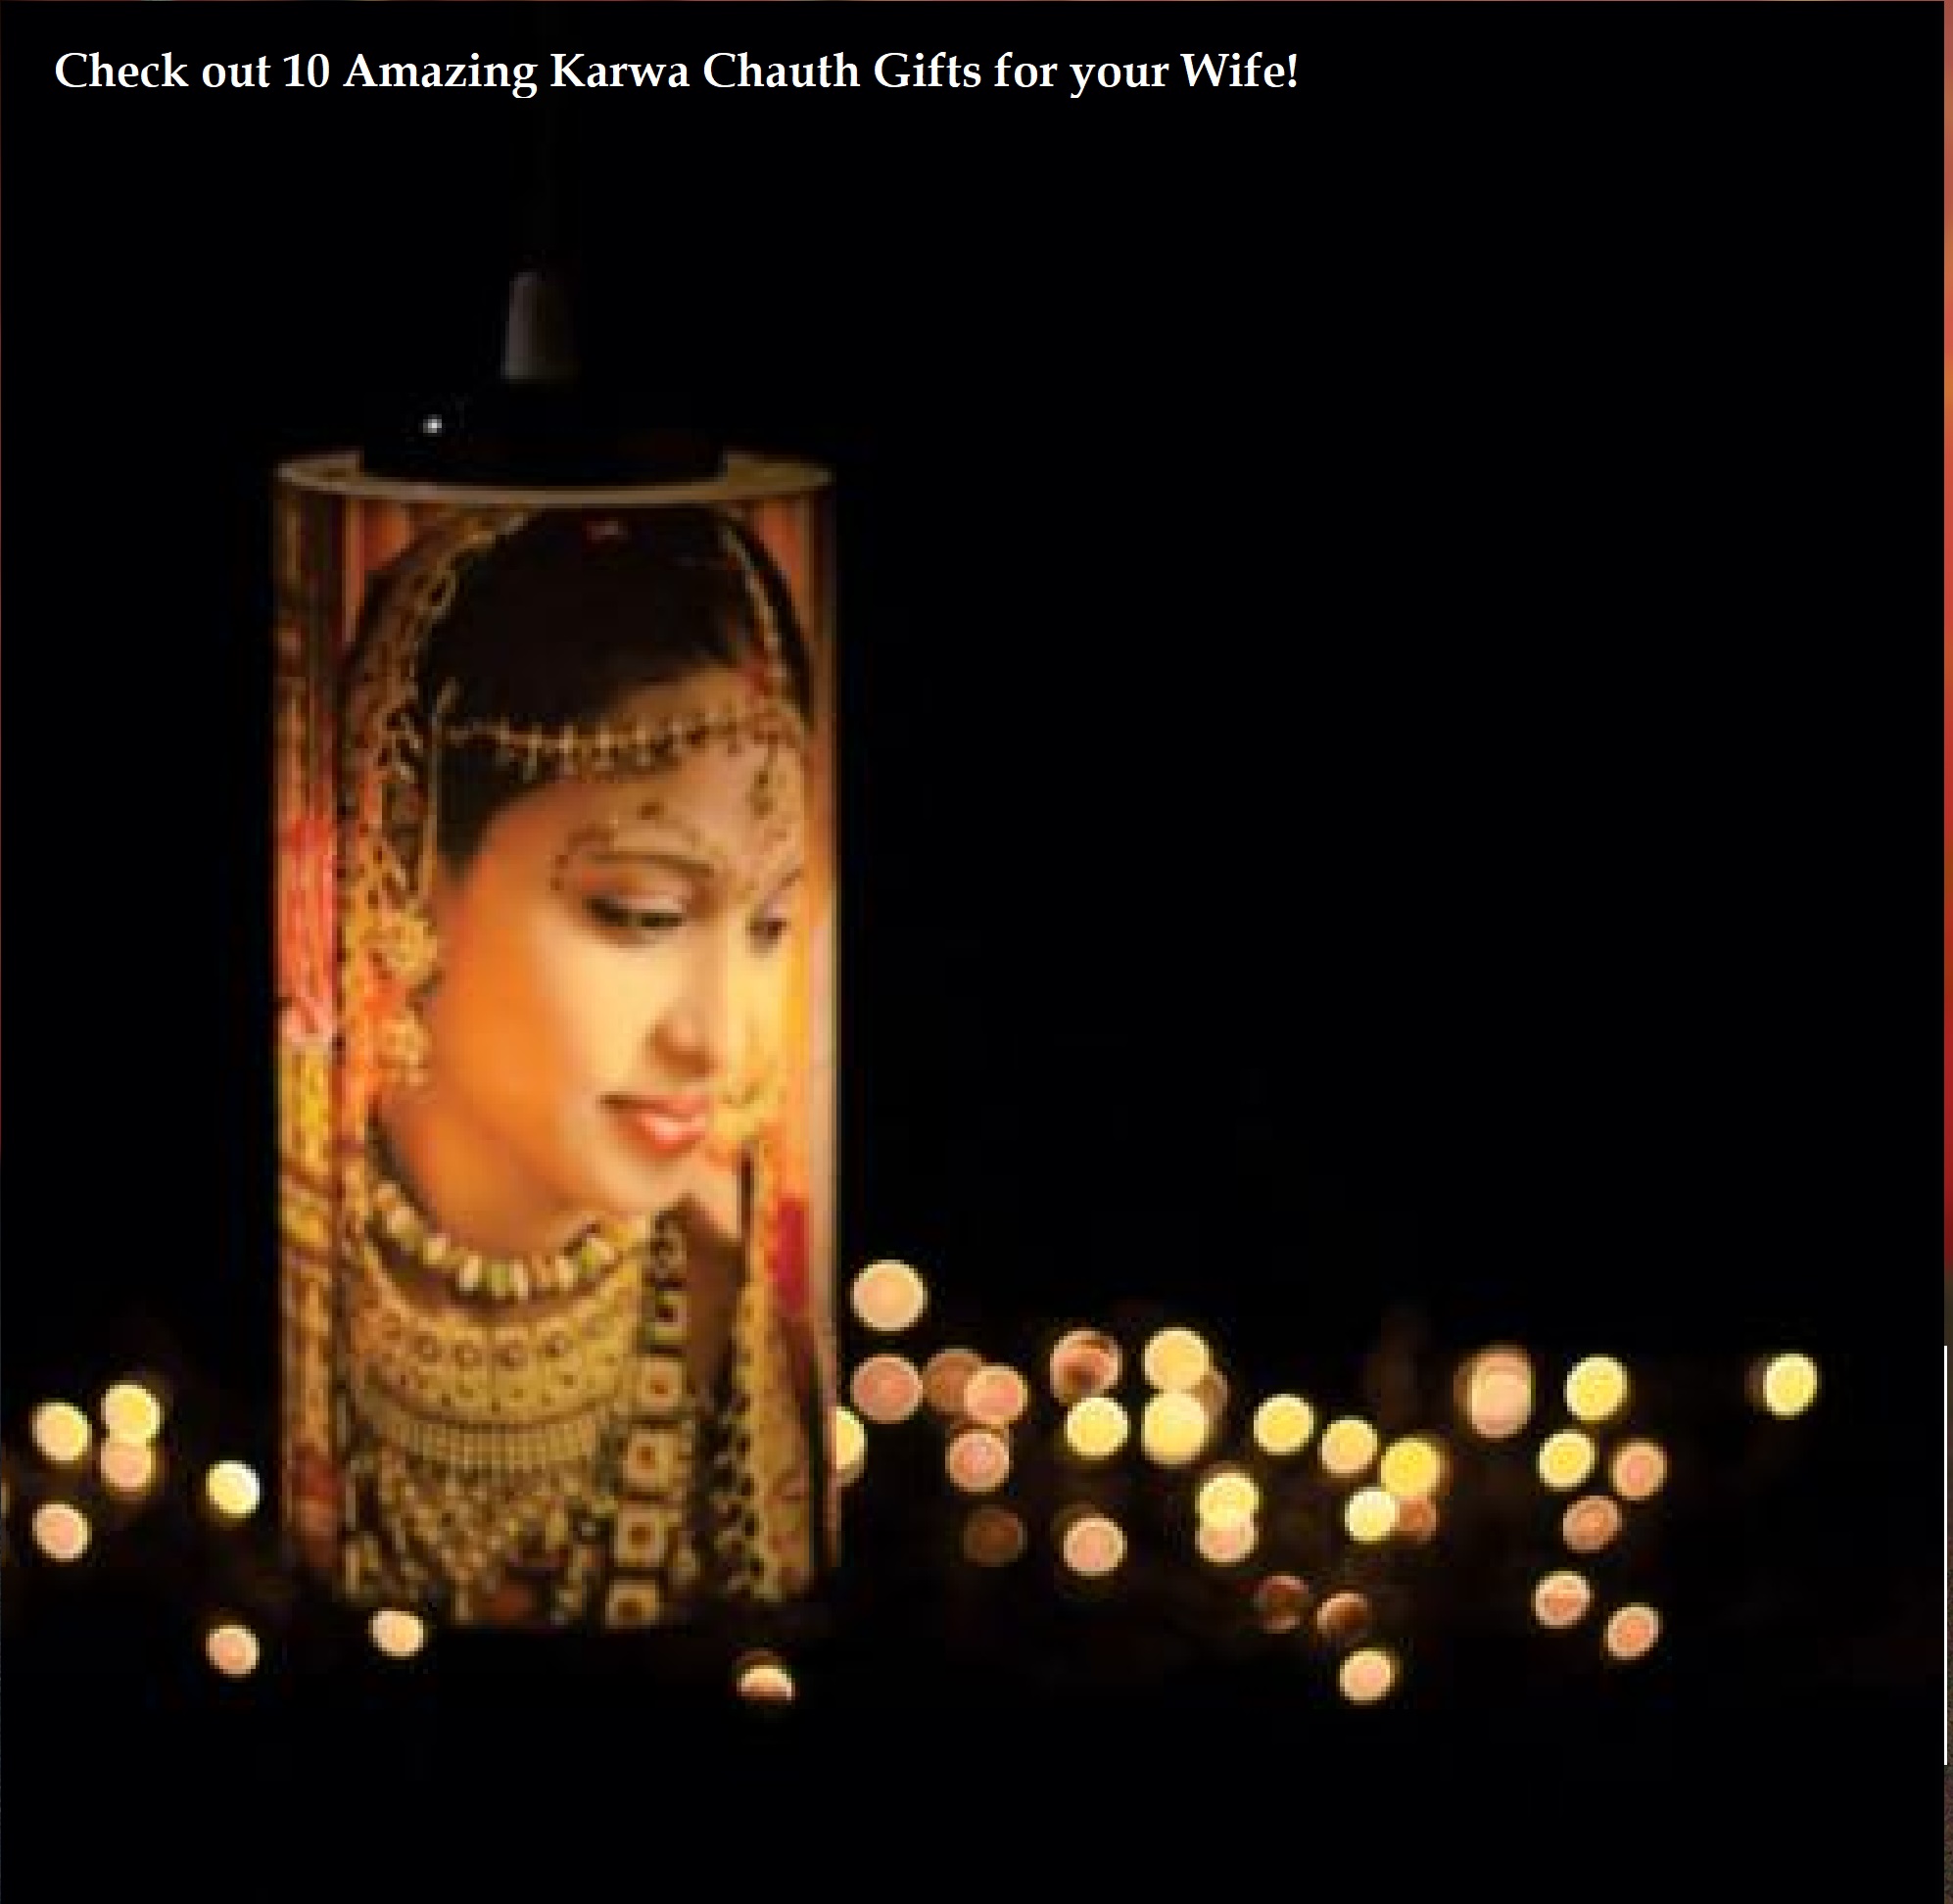 Karwa Chauth Gifts for Saas: Strengthening Bonds of Love - Online Gifts |  Flowers, Cakes, Gift, Anniversary Gift etc.